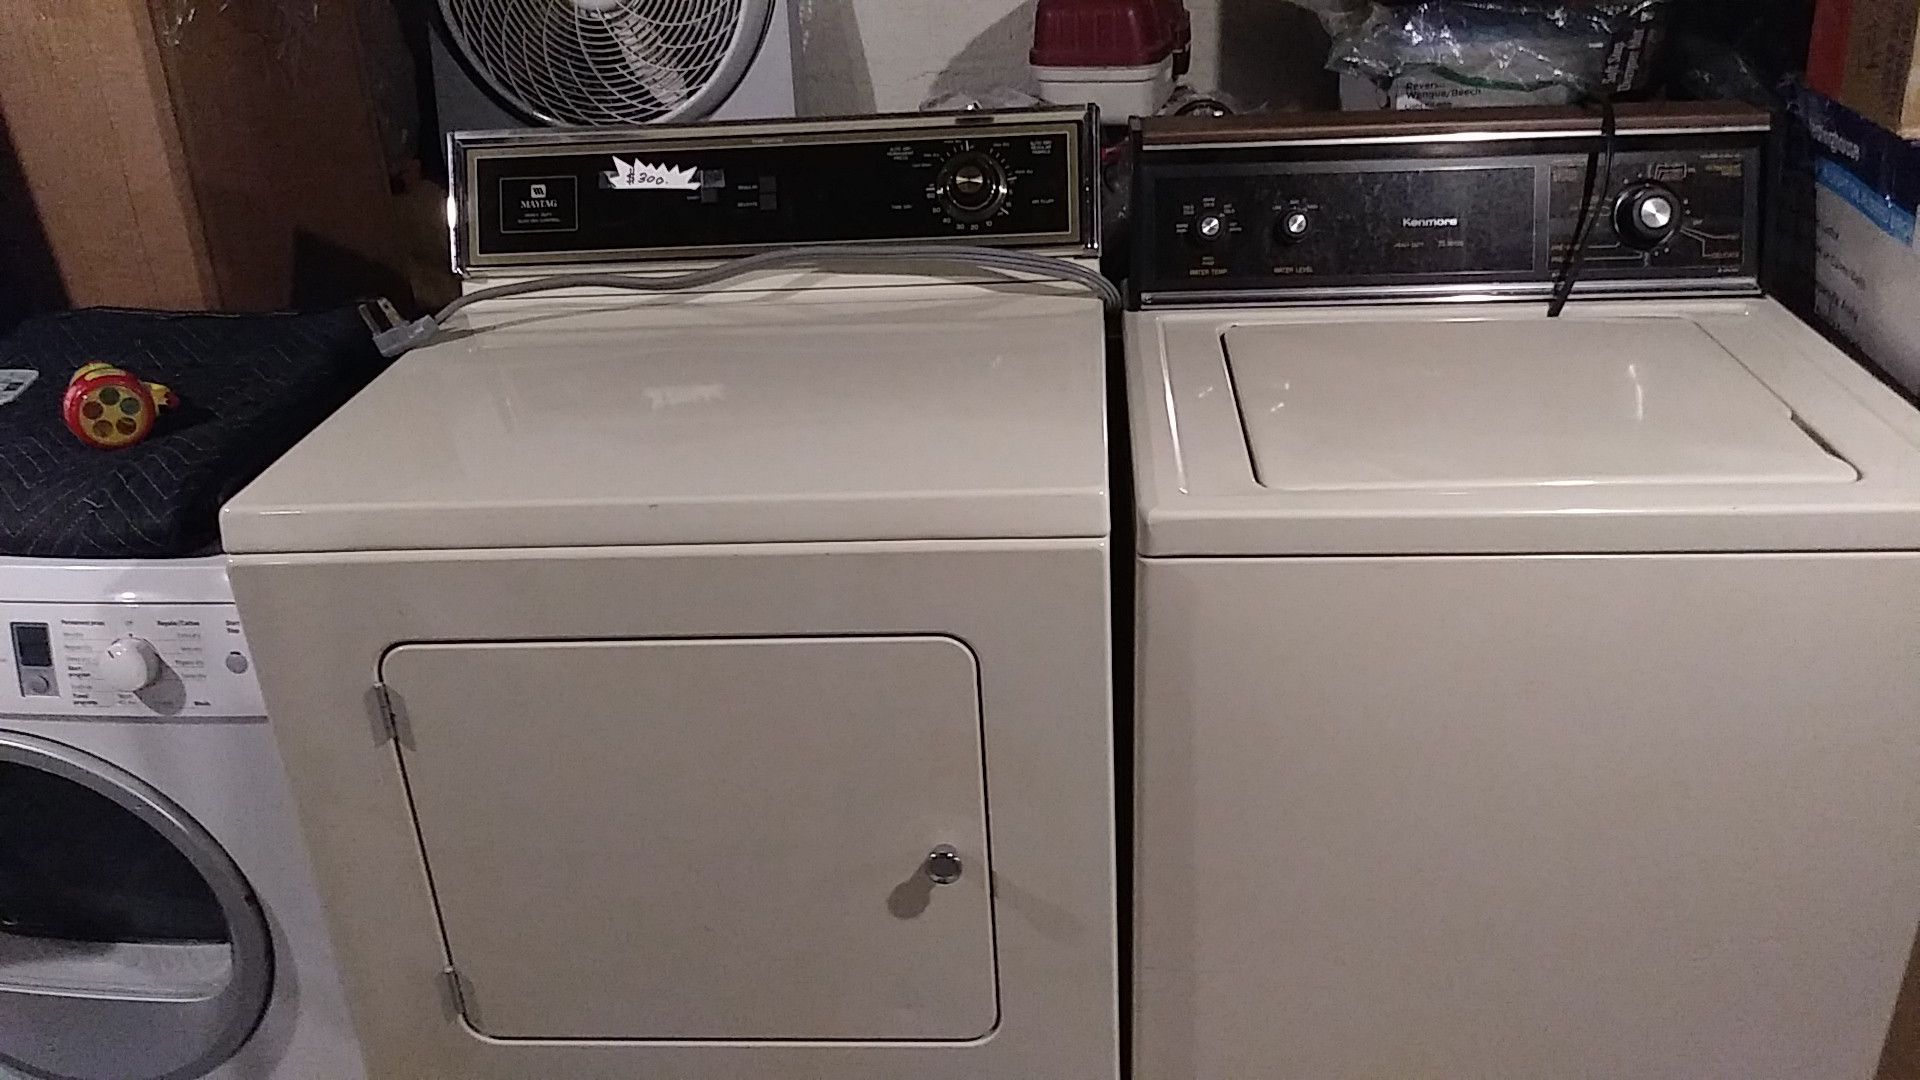 Maytag Dryer and Kenmore washer